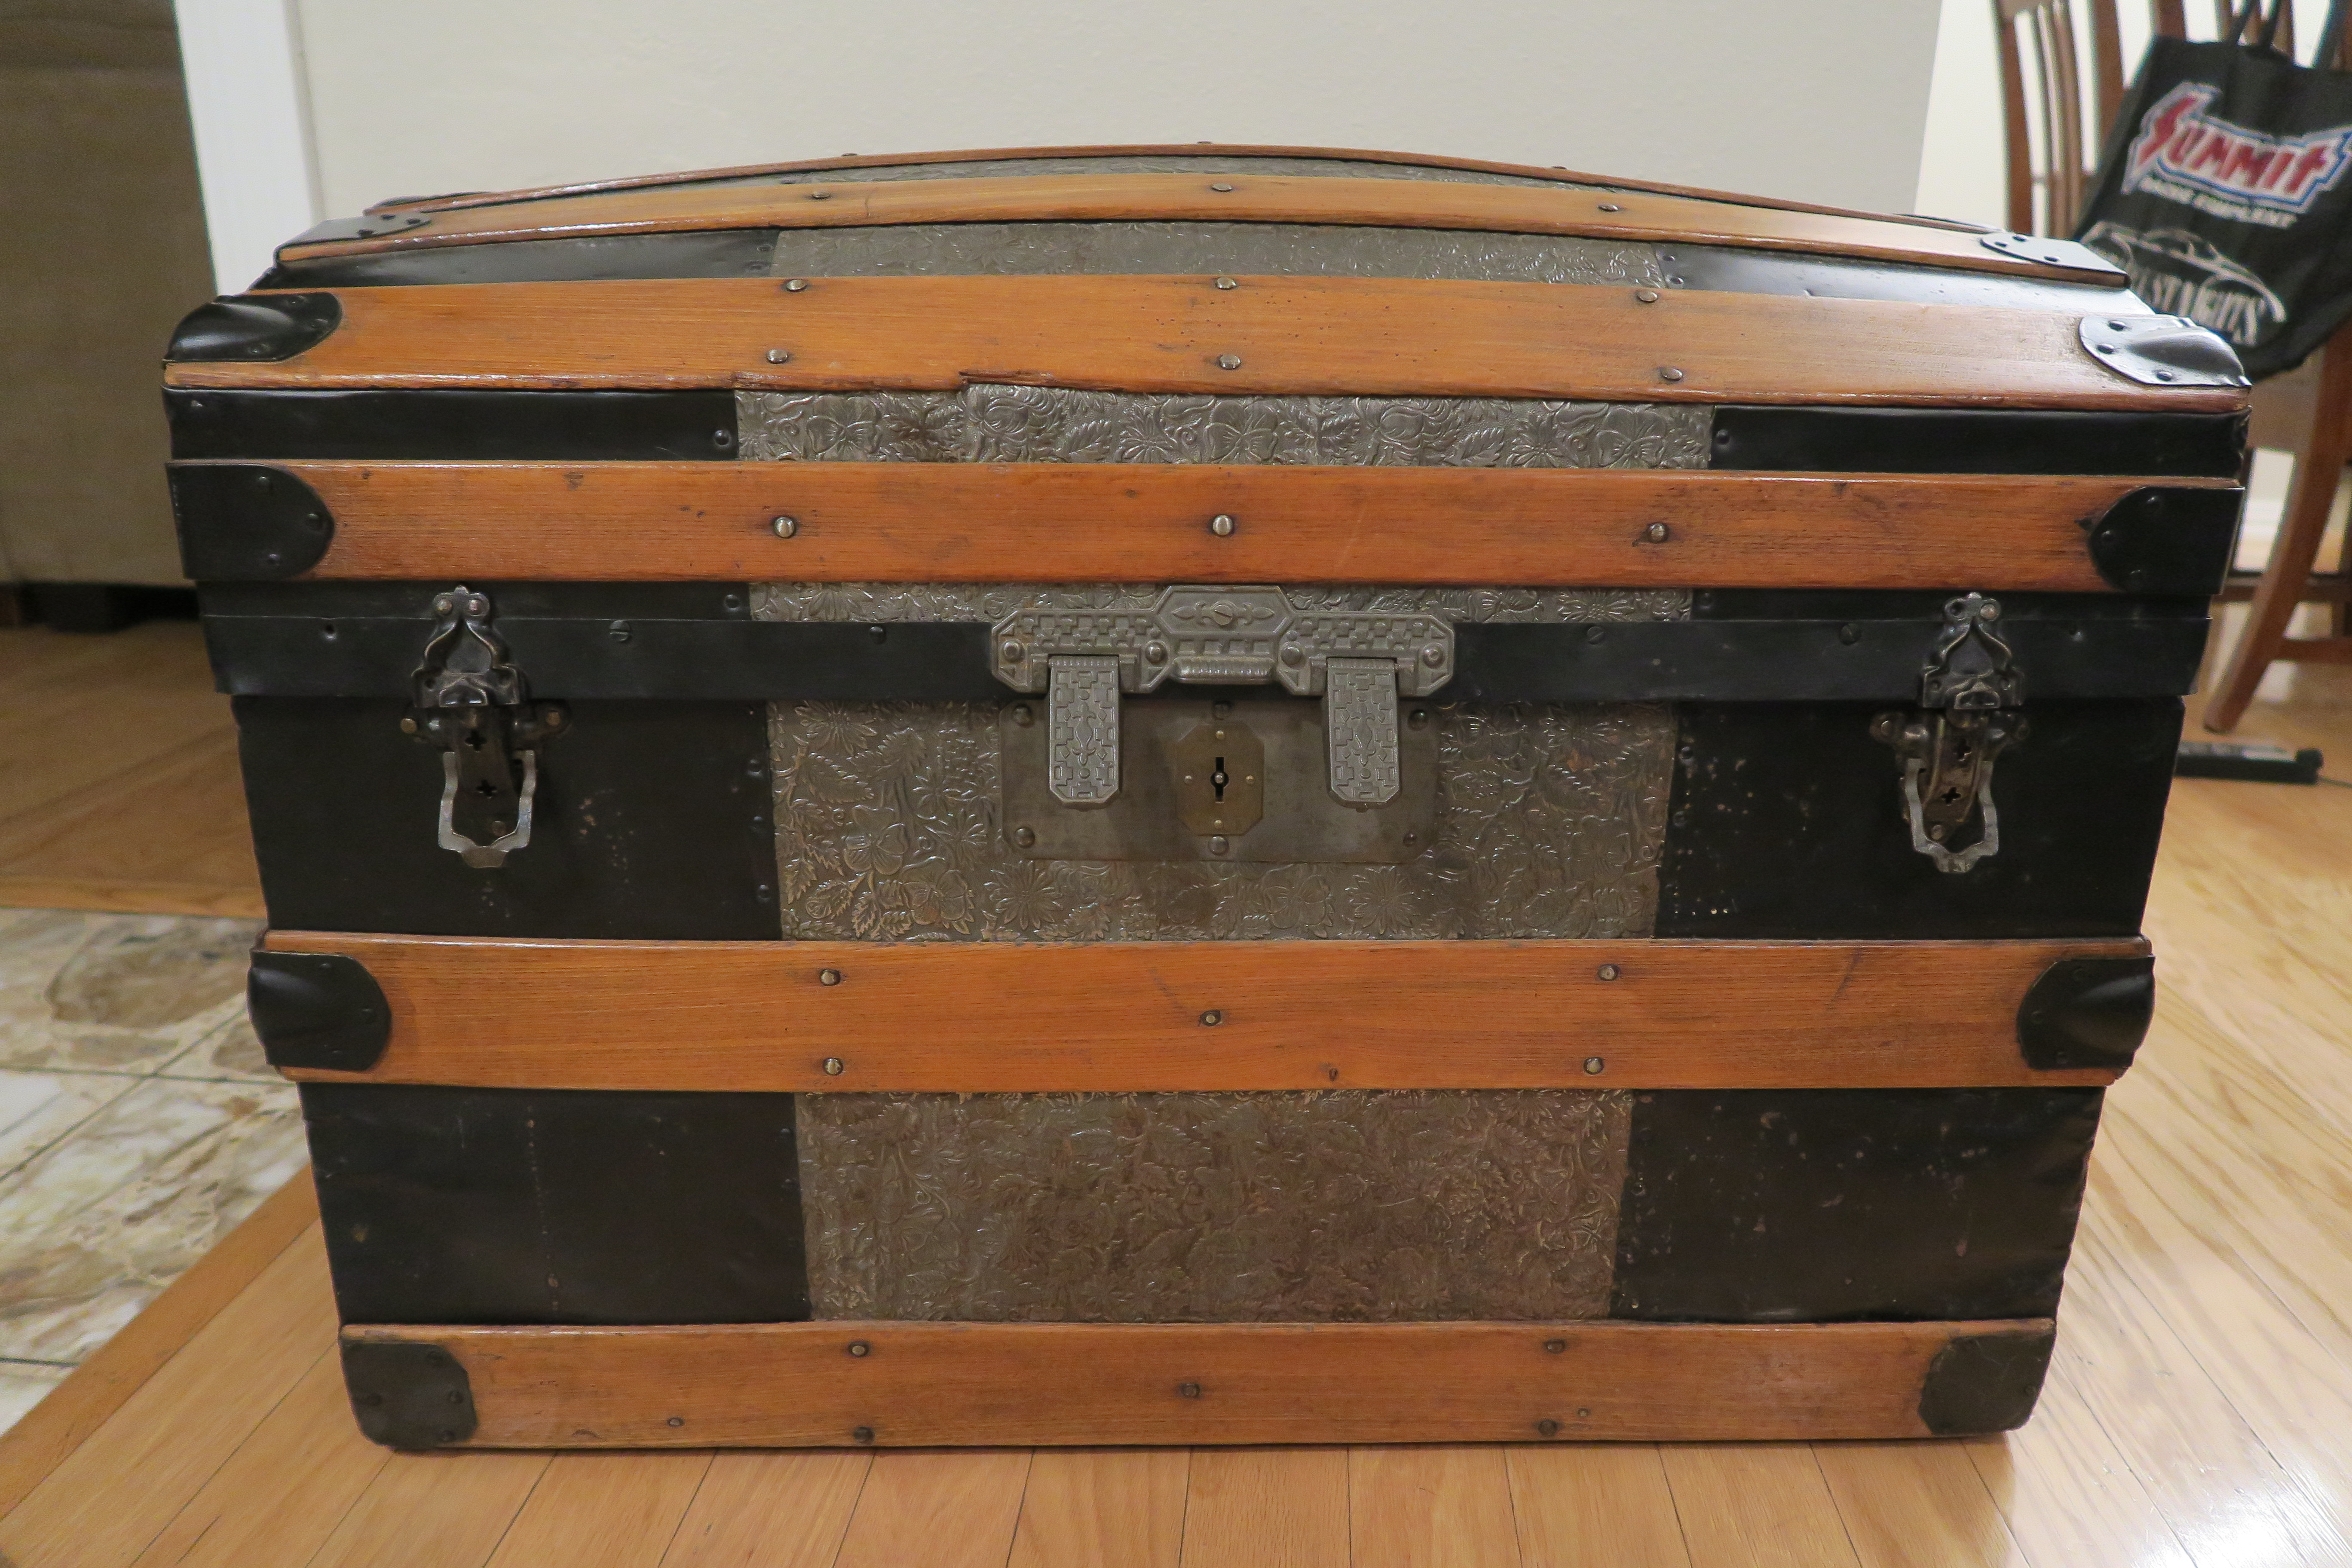 How To Determine The Age of An Antique Steamer Trunk 